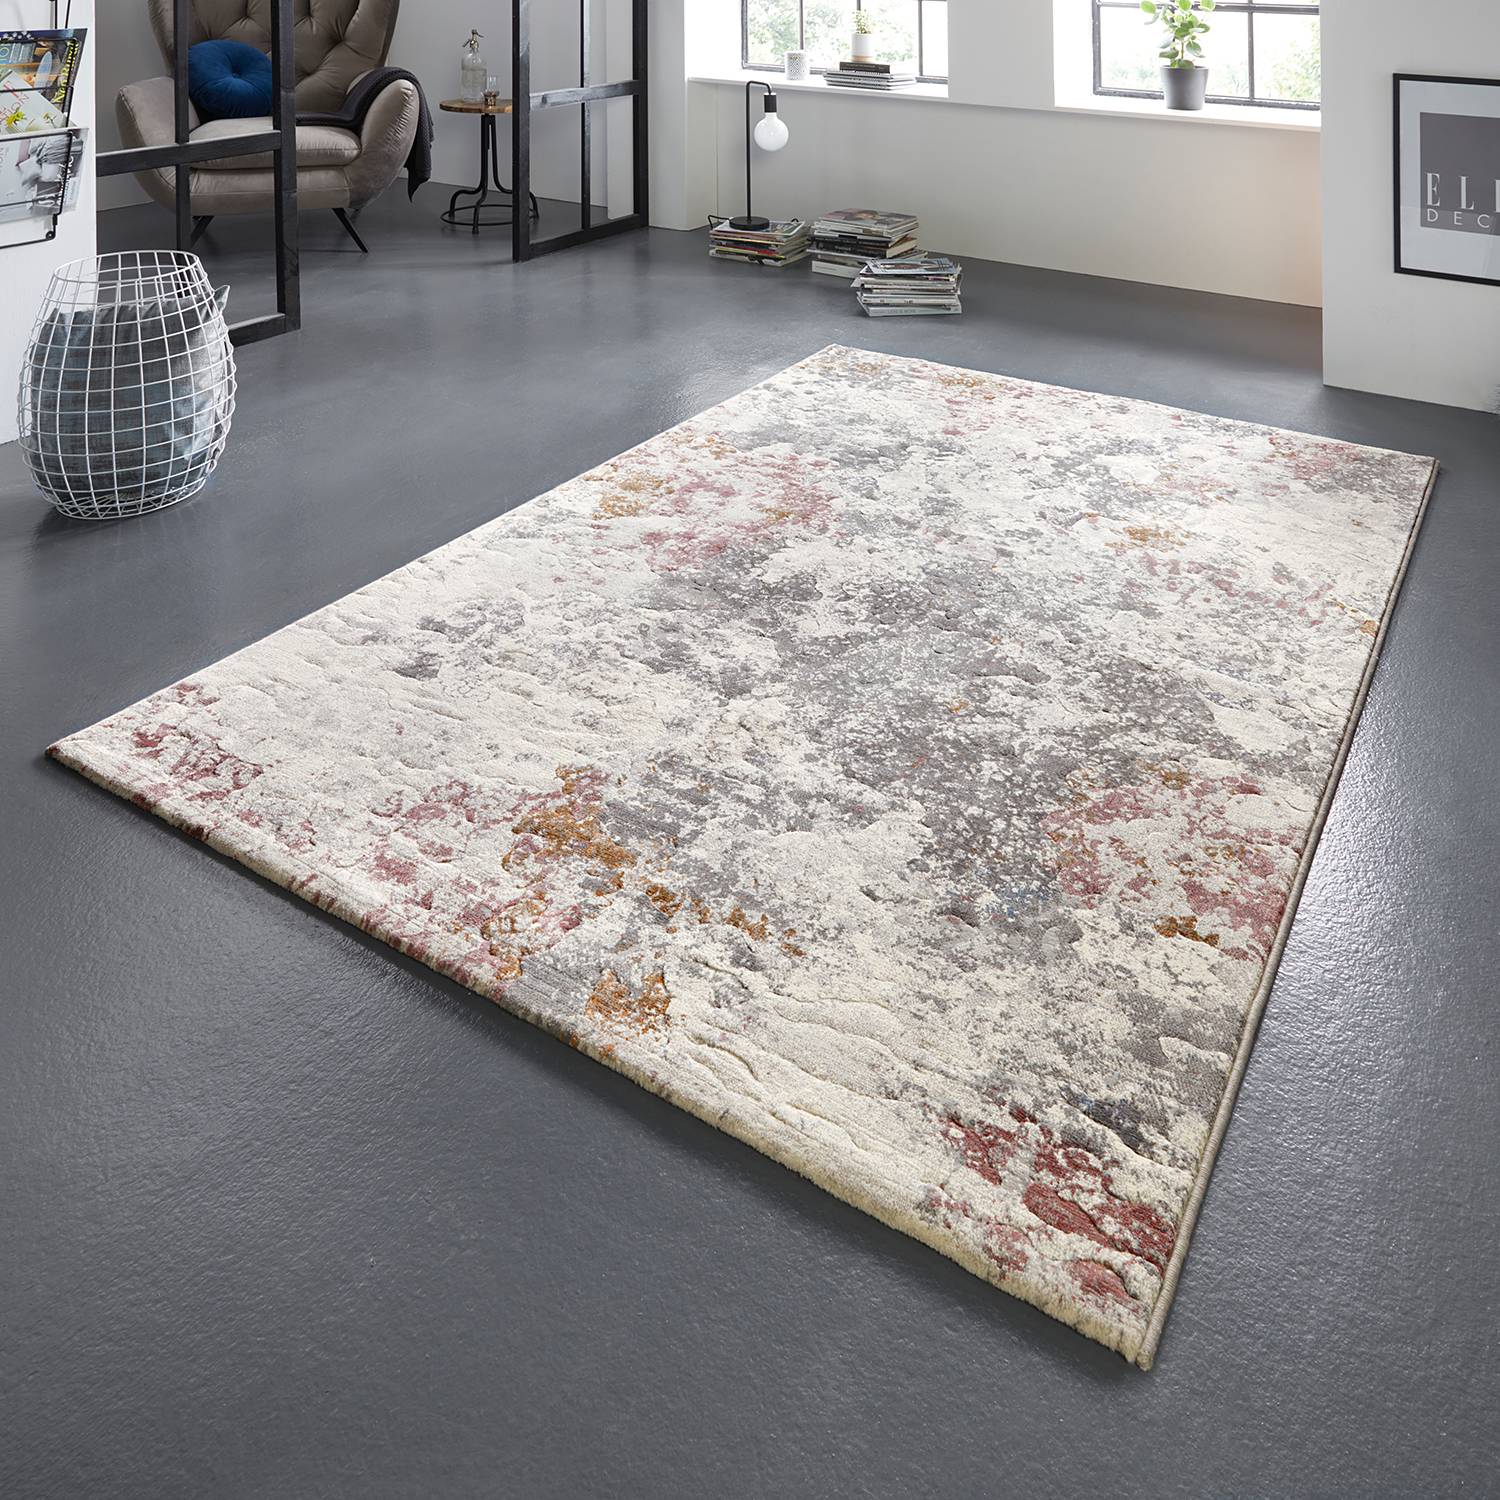 Image of Tapis Fontaine 000000001000168248